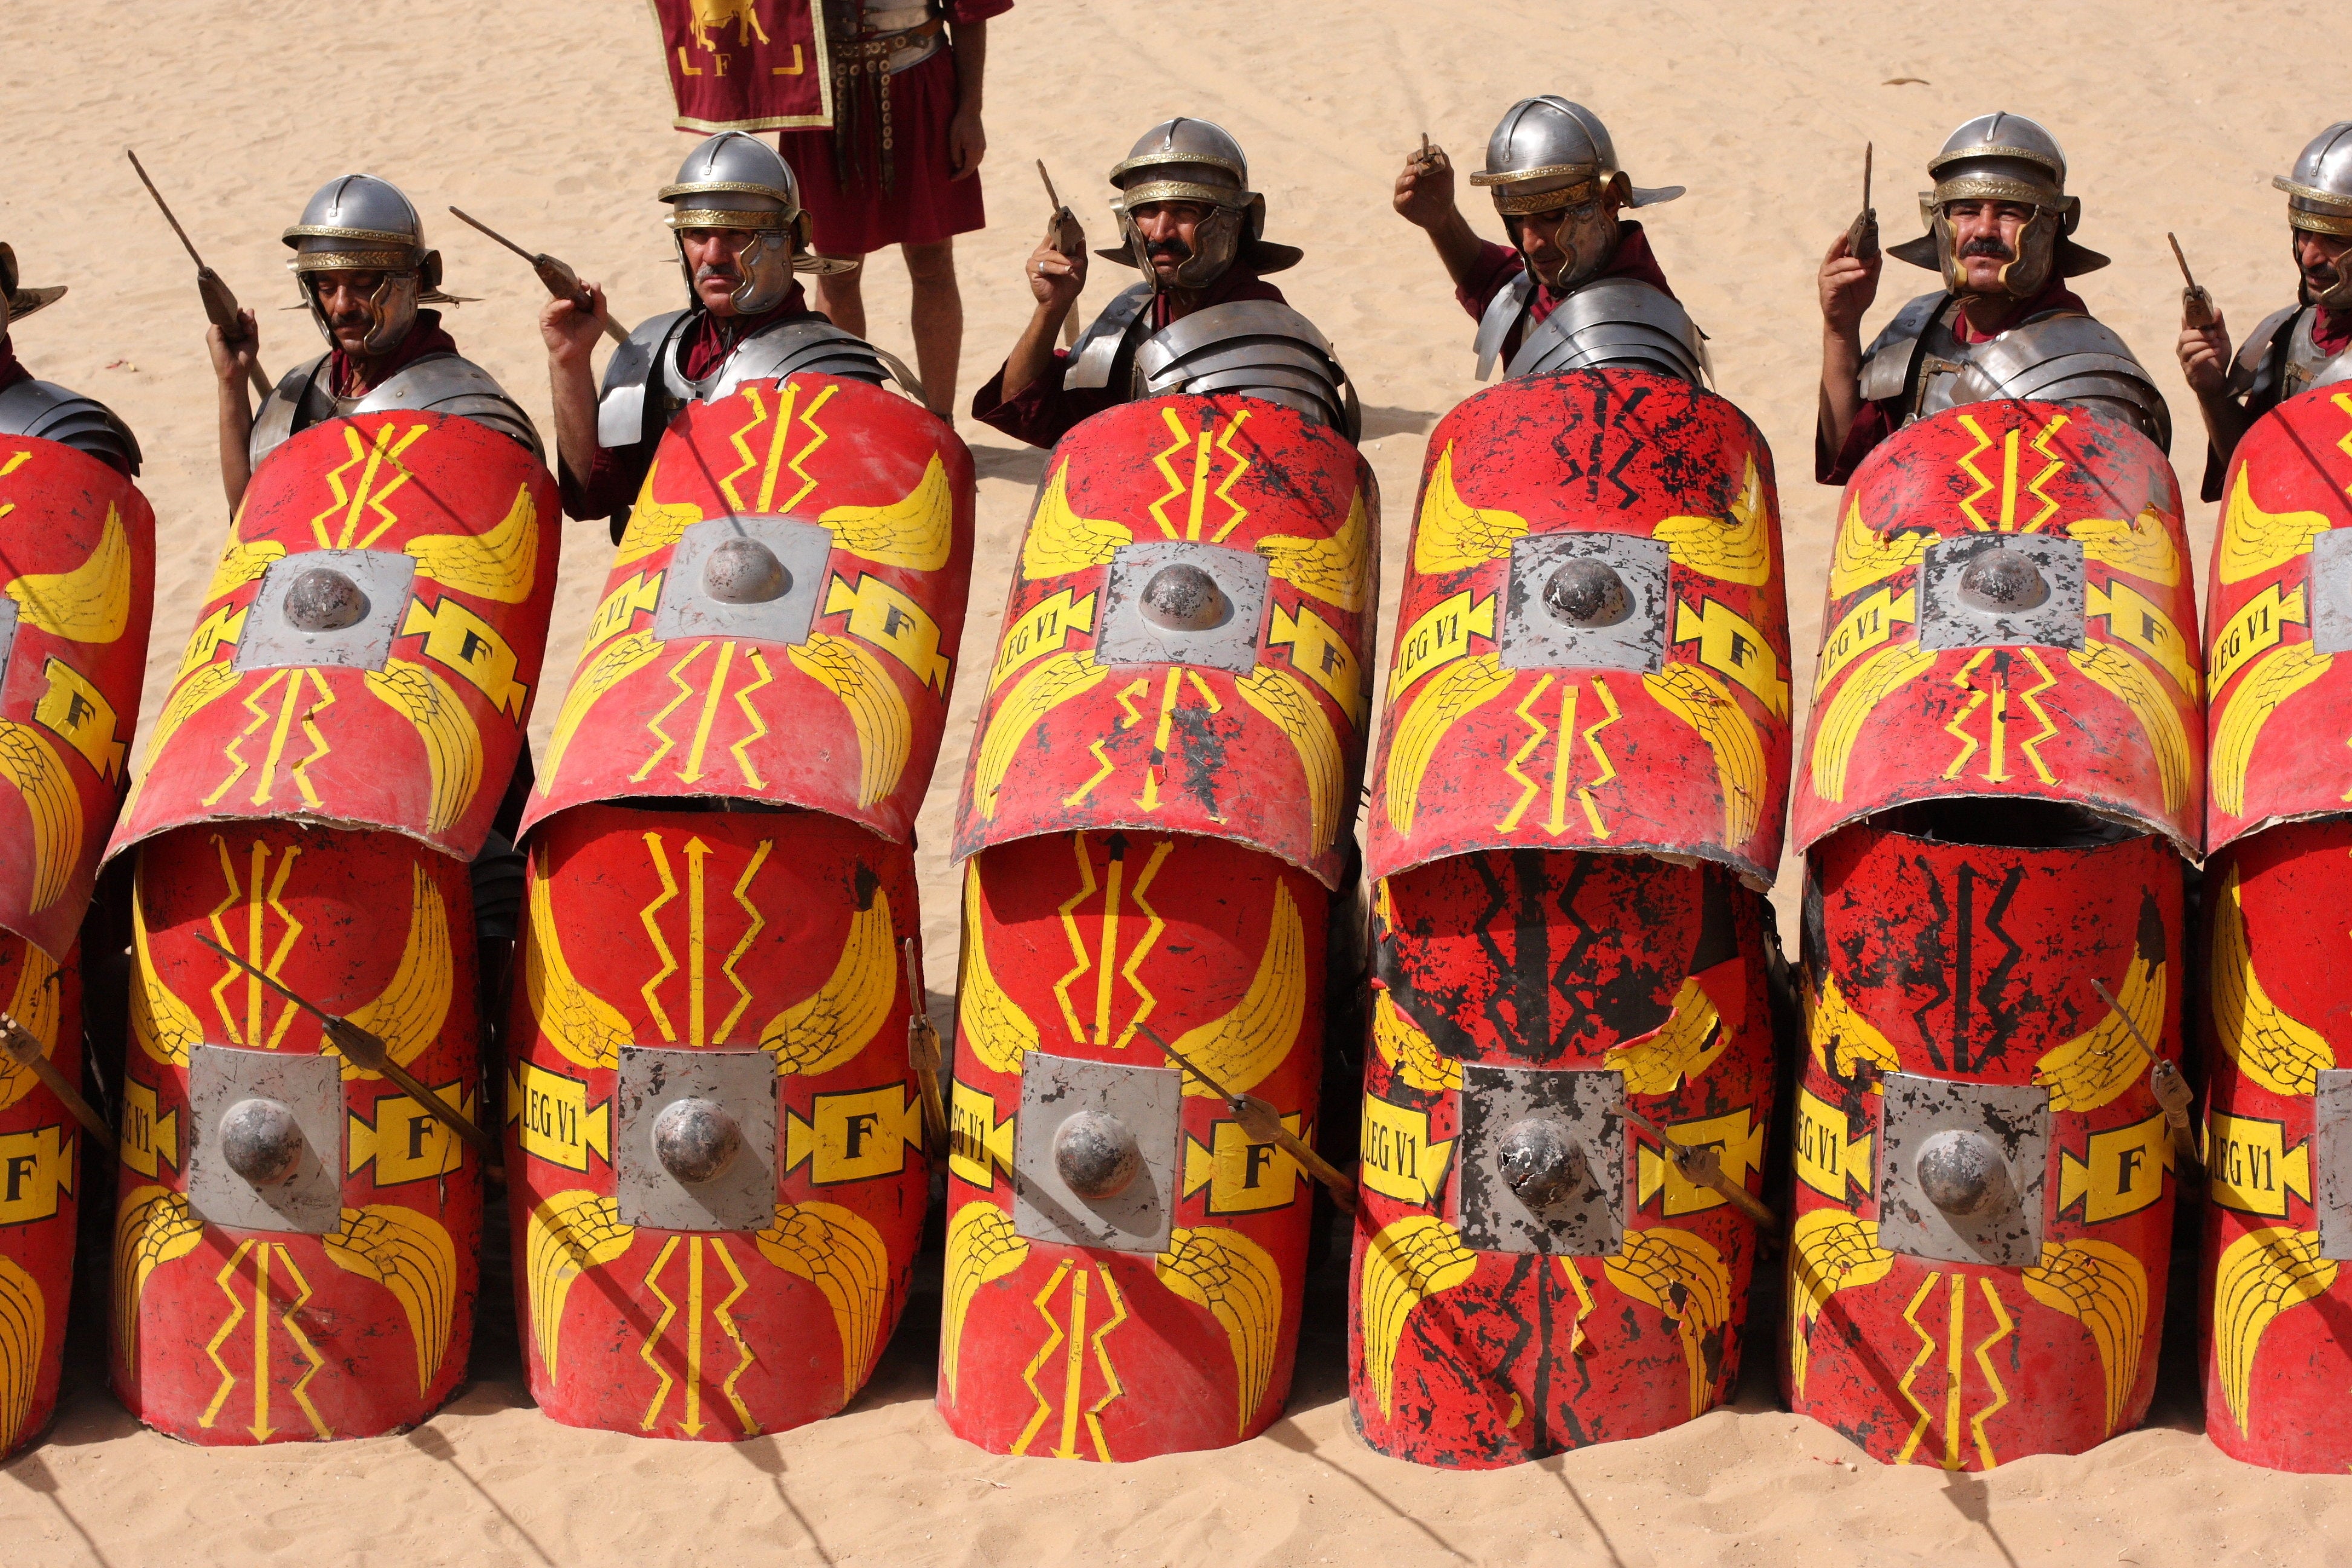 This was the average day for an ancient Roman soldier